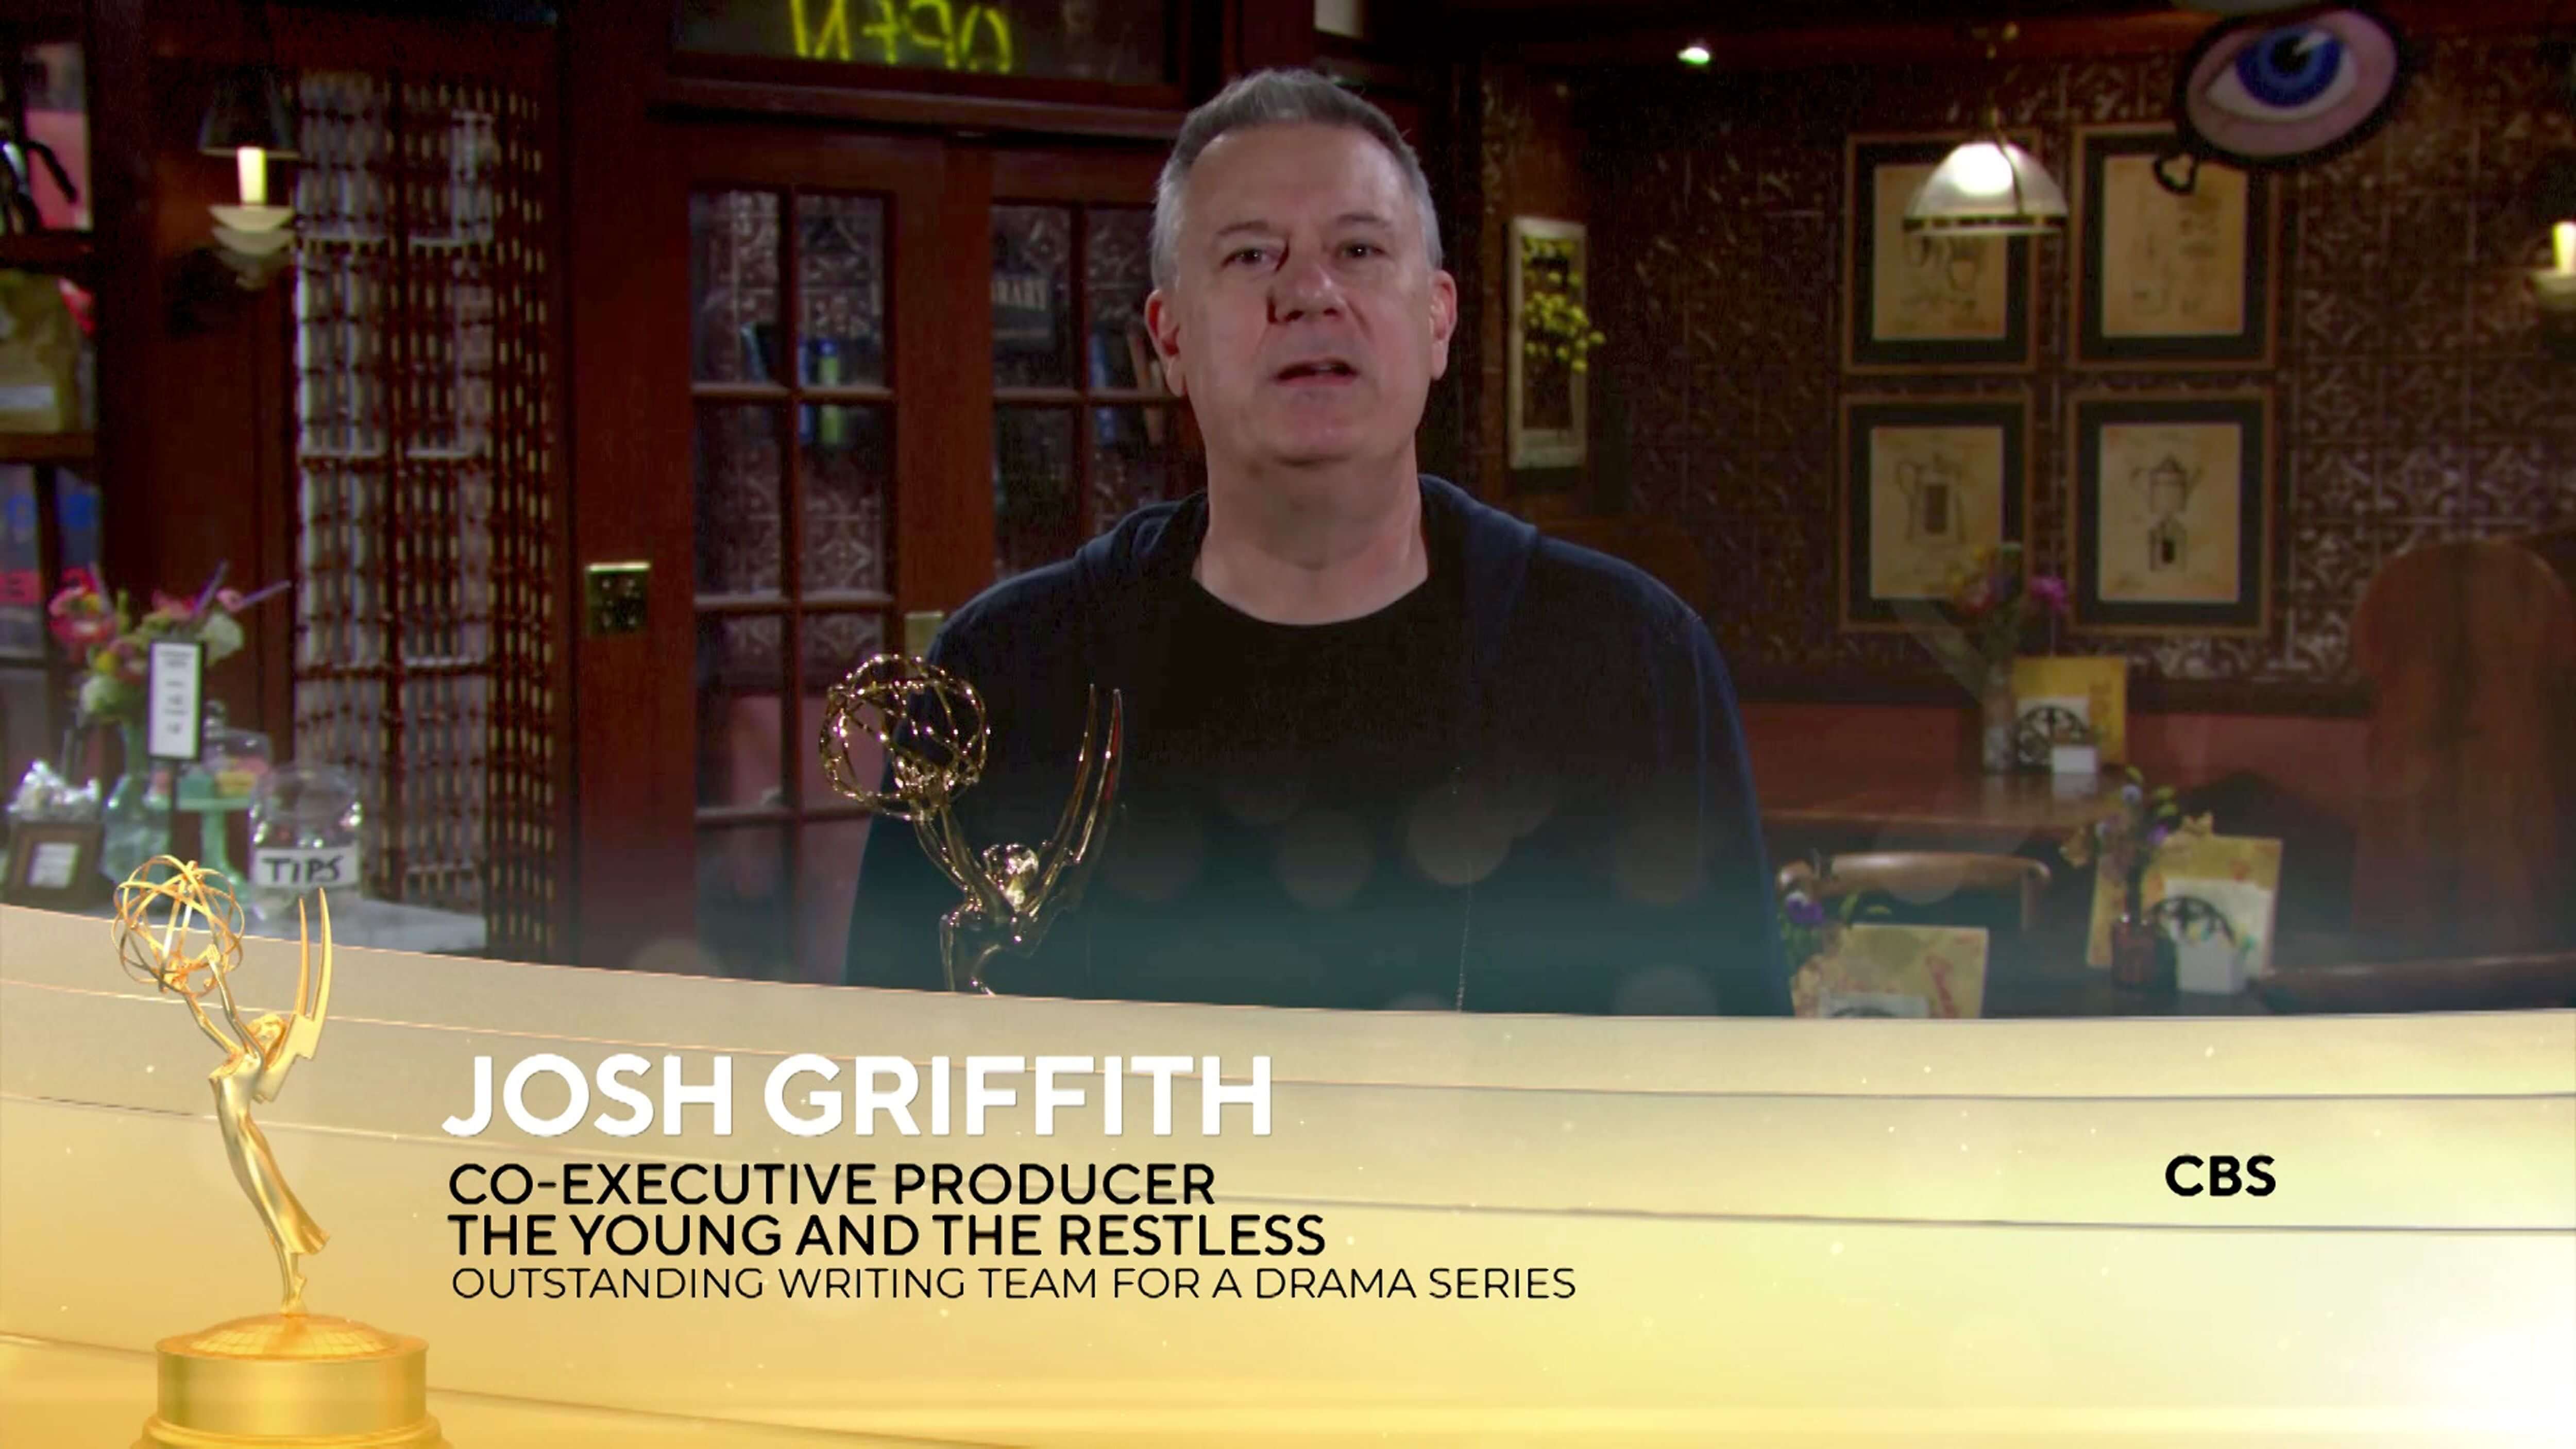 'The Young and the Restless' executive producer and head writer Josh Griffith accepting a Daytime Emmy on set of the soap opera.